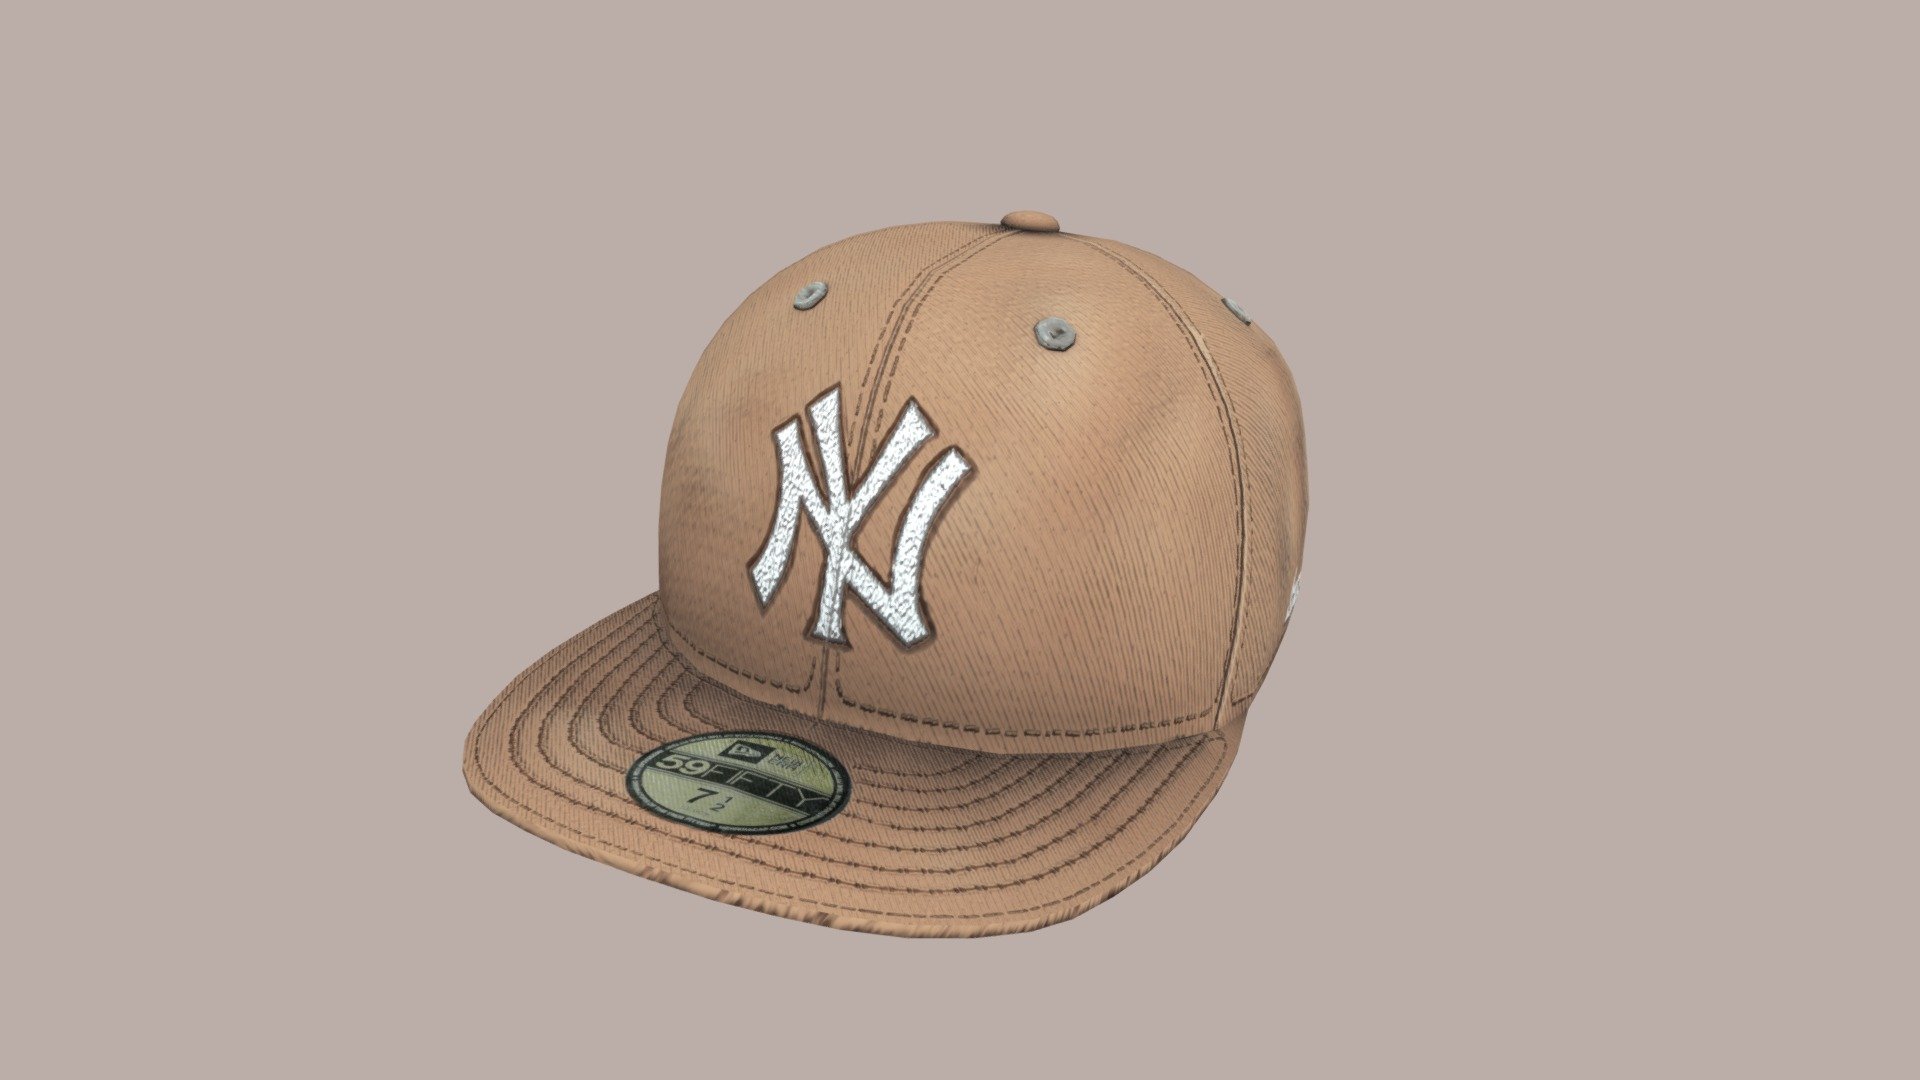 Optimized, fully rigged &amp; weight painted, 3D model of fitted baseball caps made from scratch by me, Hayweee in Blender &amp; Substance Painter.

✦ Fitted Cap Tris: 2,734

⇢ Ambient Occlusion, Metallic &amp; Normal Maps

⇢ 8 Baseball Textures Included: Pittsburgh, Oakland, New York, Cincinnati, Atlanta, Chicago, Toronto designed baseball hats





✦ This hat can also be downloaded here on my Sellfy website




✧  Contact me here if you have any questions - https://discord.gg/hayweeesstash




✦ Can be used with credit to Hayweee'sStash


 - 3D Fitted Baseball Caps ⋆ VR 「 3D Assets 」 - 3D model by Hayweee's Stash (@HayweeesStash) 3d model